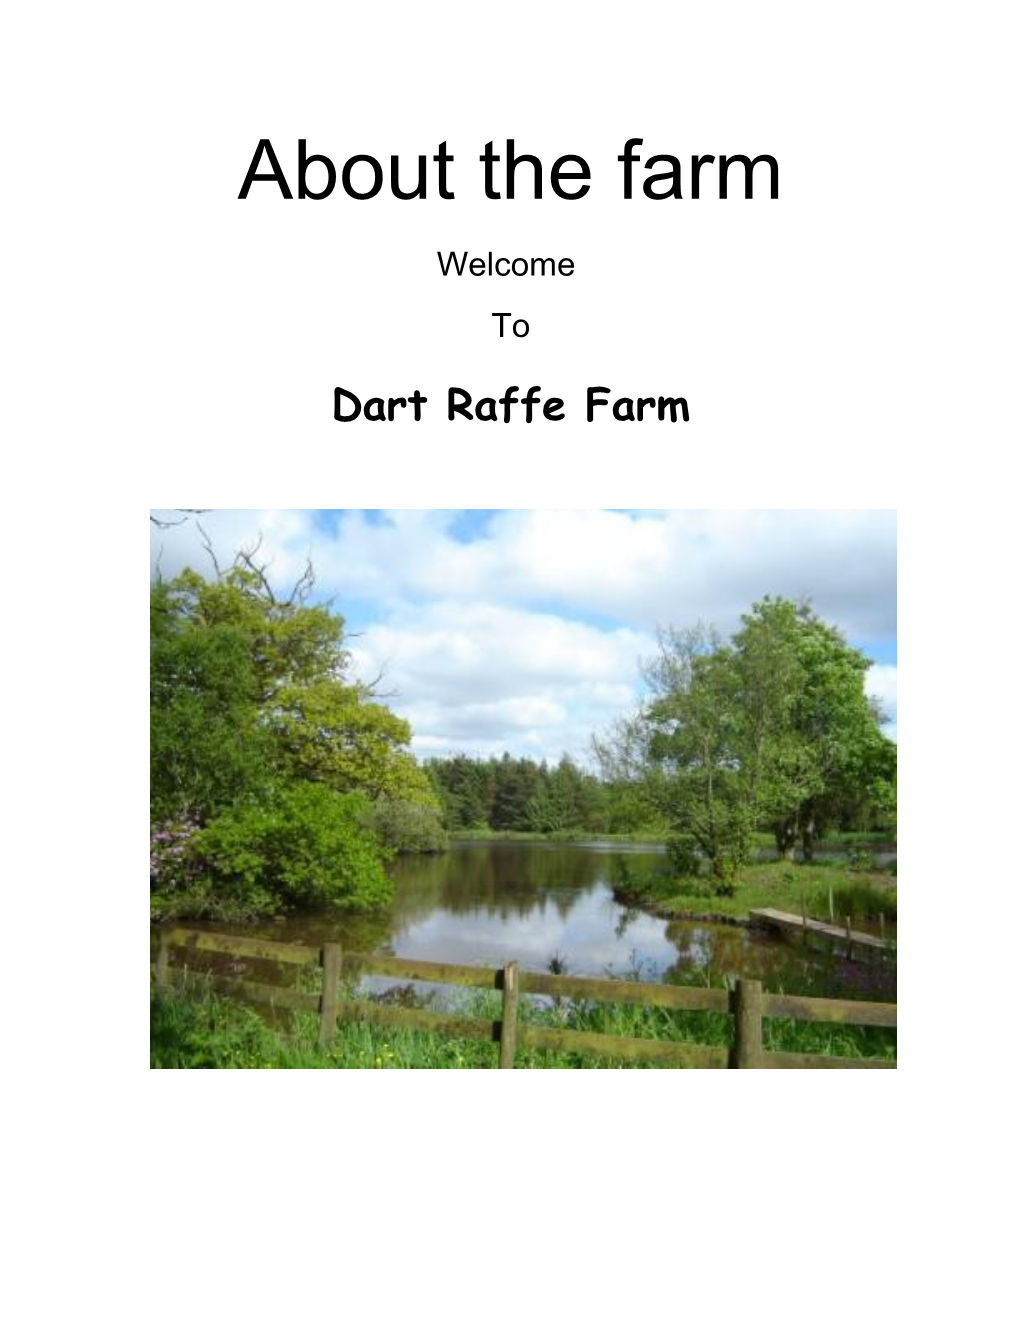 About the Farm